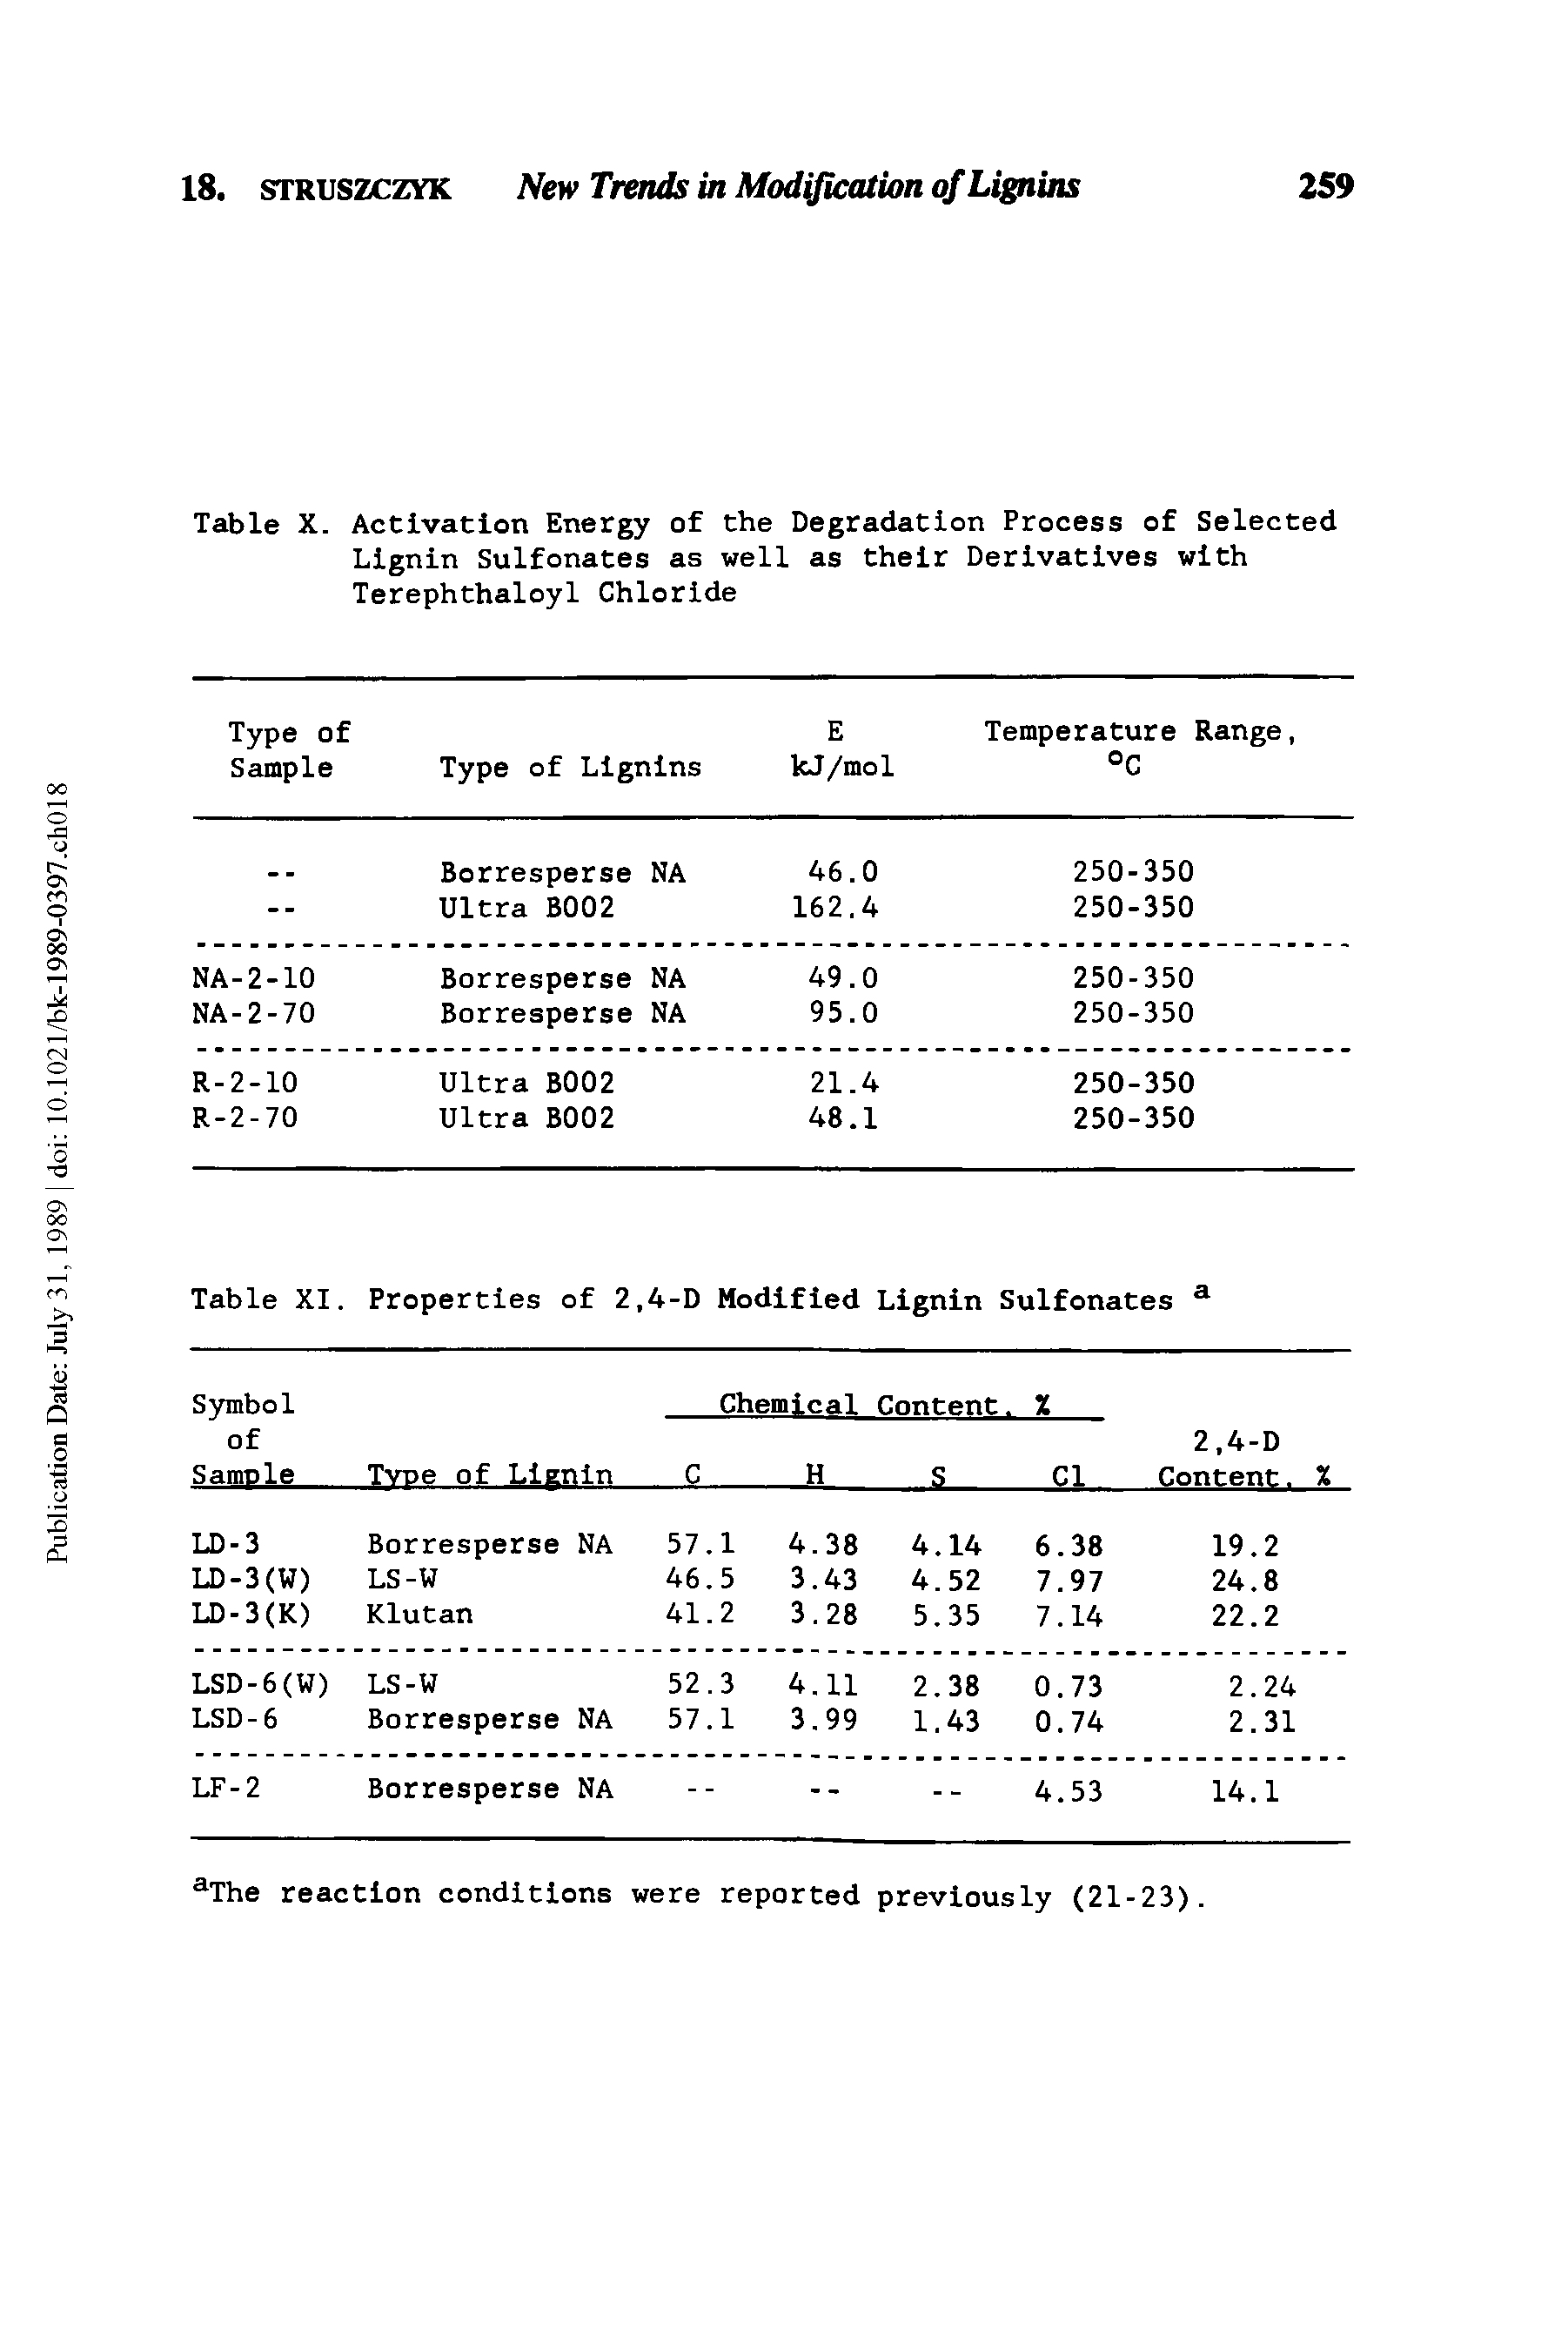 Table X. Activation Energy of the Degradation Process of Selected Lignin Sulfonates as well as their Derivatives with Terephthaloyl Chloride...